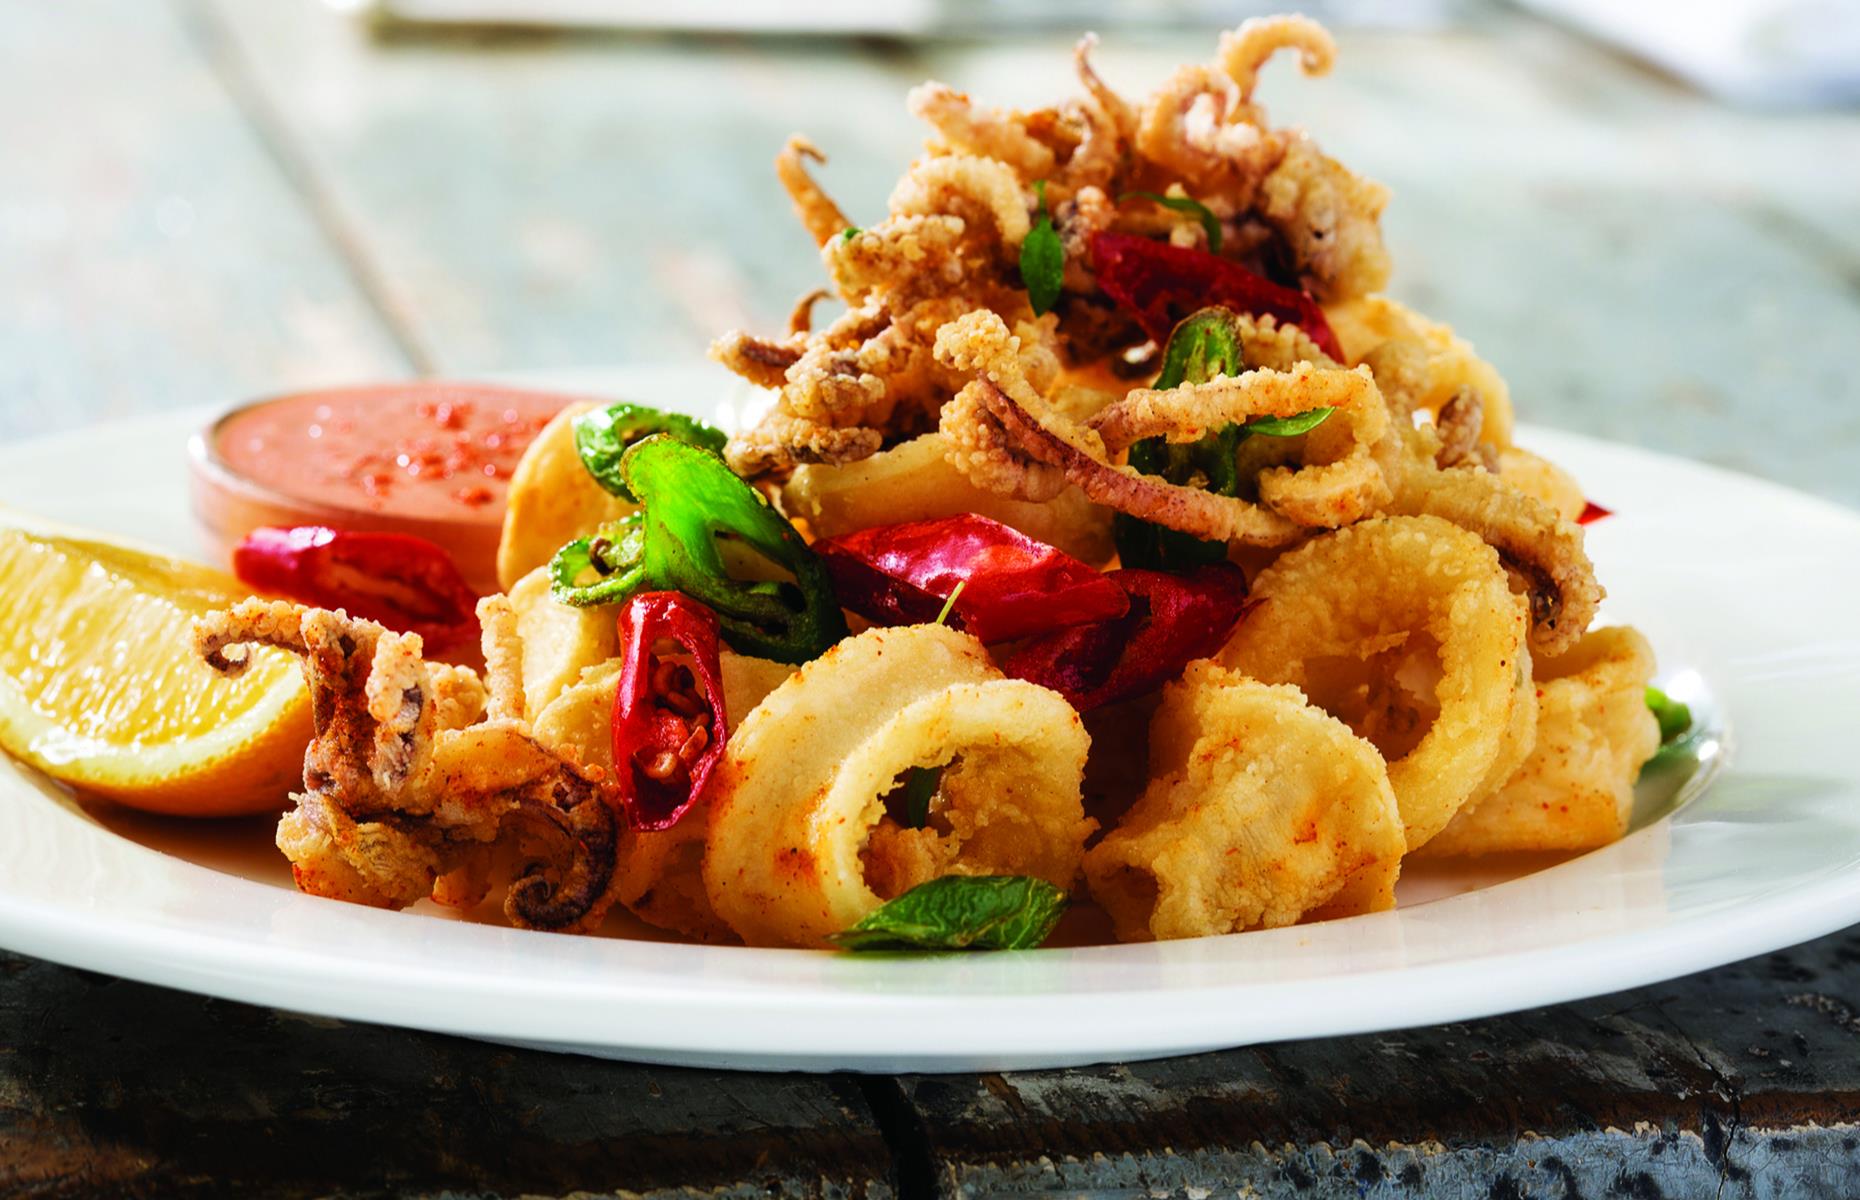 <p>It’s not just any calamari, though. The official dish is <a href="https://www.towndock.com/recipes/recipe-rhode-island-style-calamari">Rhode Island–style calamari</a>, where tubes and tentacles are dusted in flour laced with pepper and garlic before being pan-fried and tossed with hot cherry peppers and more garlic. Pickle brine is sometimes added for extra tang and the tender pieces are often tipped out onto a bed of crisp lettuce.</p>  <p><strong><a href="https://www.lovefood.com/galleries/98861/americas-oldest-surviving-food-brands?page=1">Now take a look at America's oldest surviving food brands</a></strong></p>